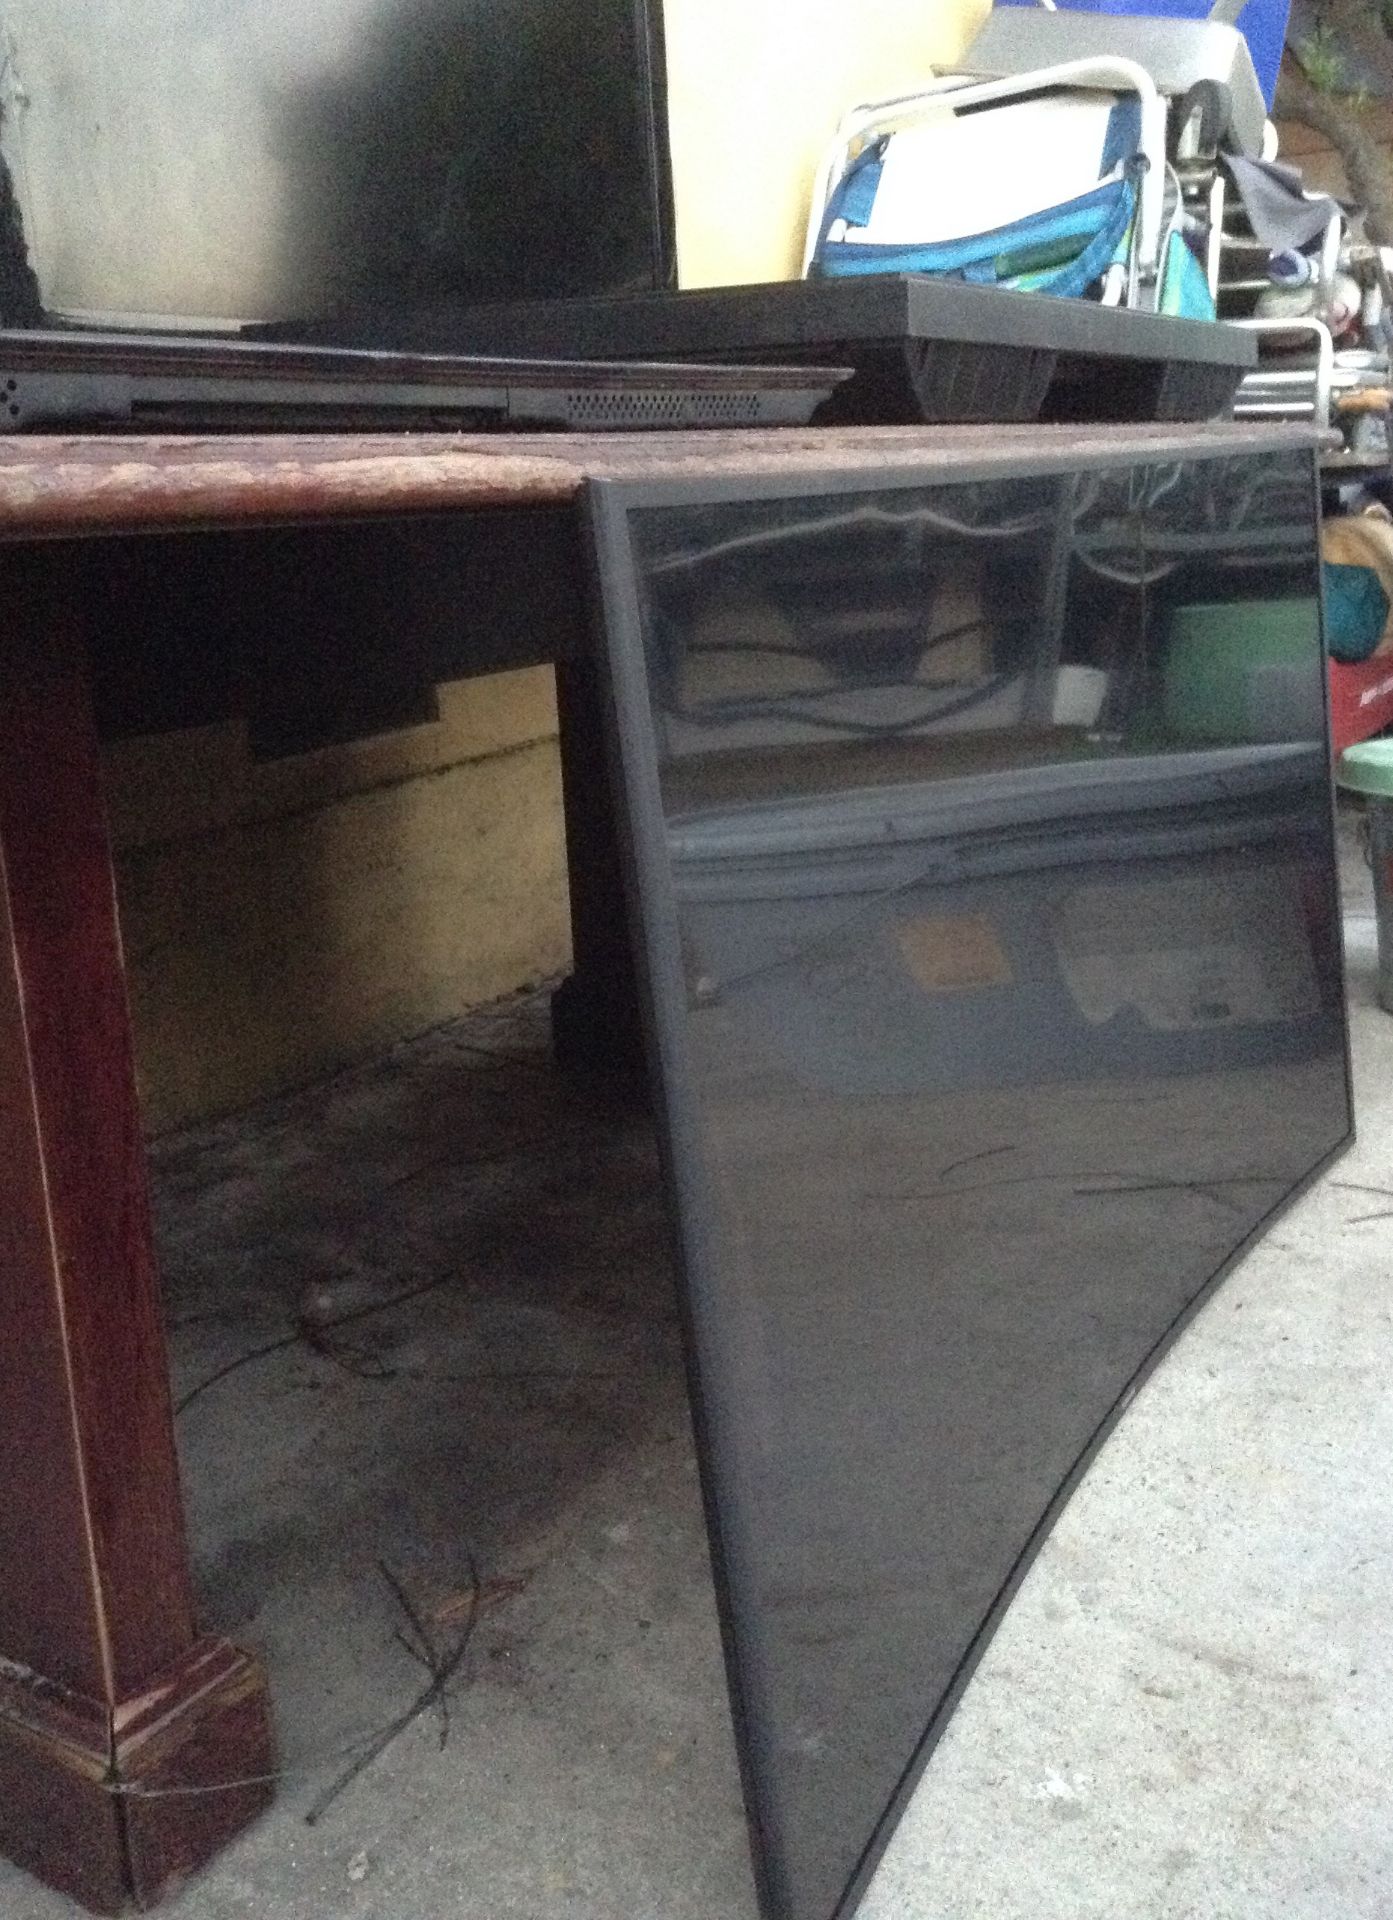 TV SCREEN LOT, LCD CURVED TV FOR PARTS UNKNOWN CONDITON - Image 2 of 4